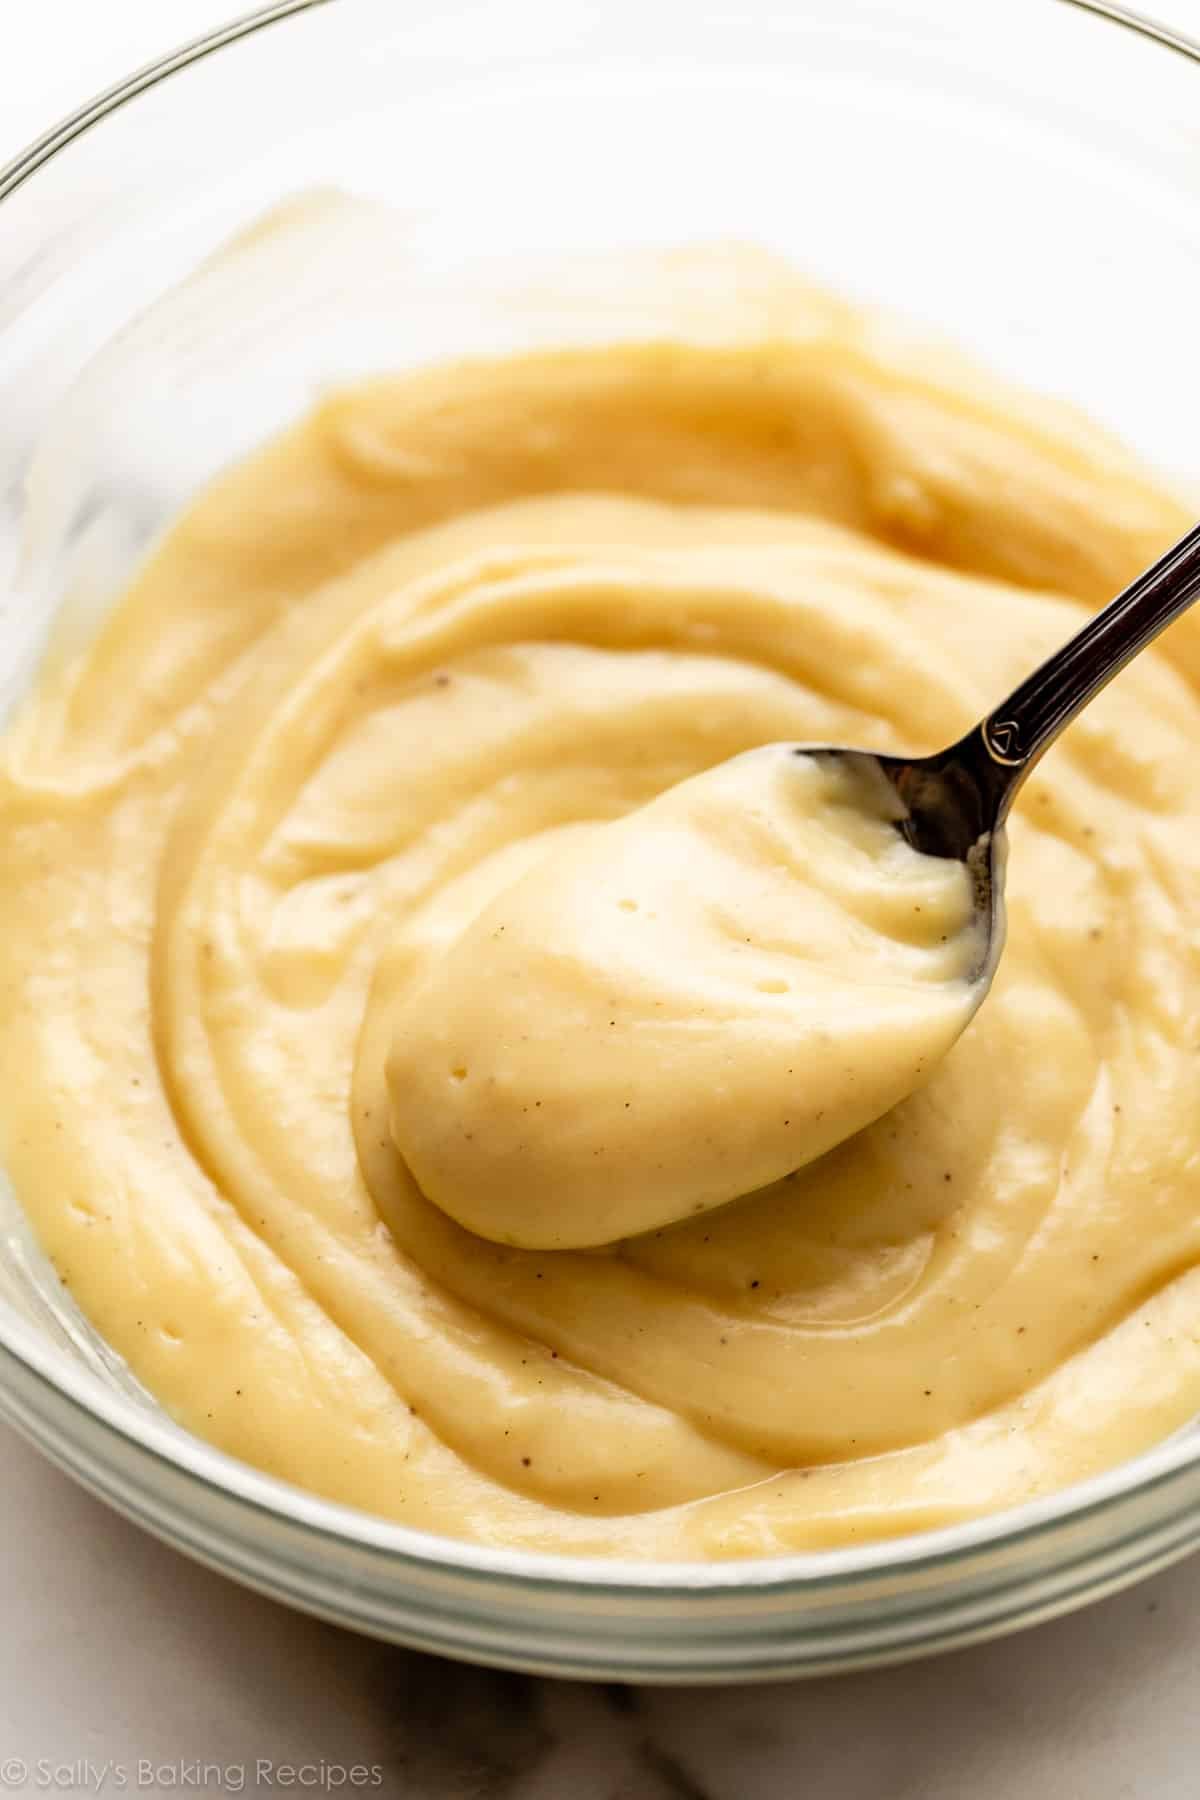 spoonful of creamy pastry cream in glass bowl.